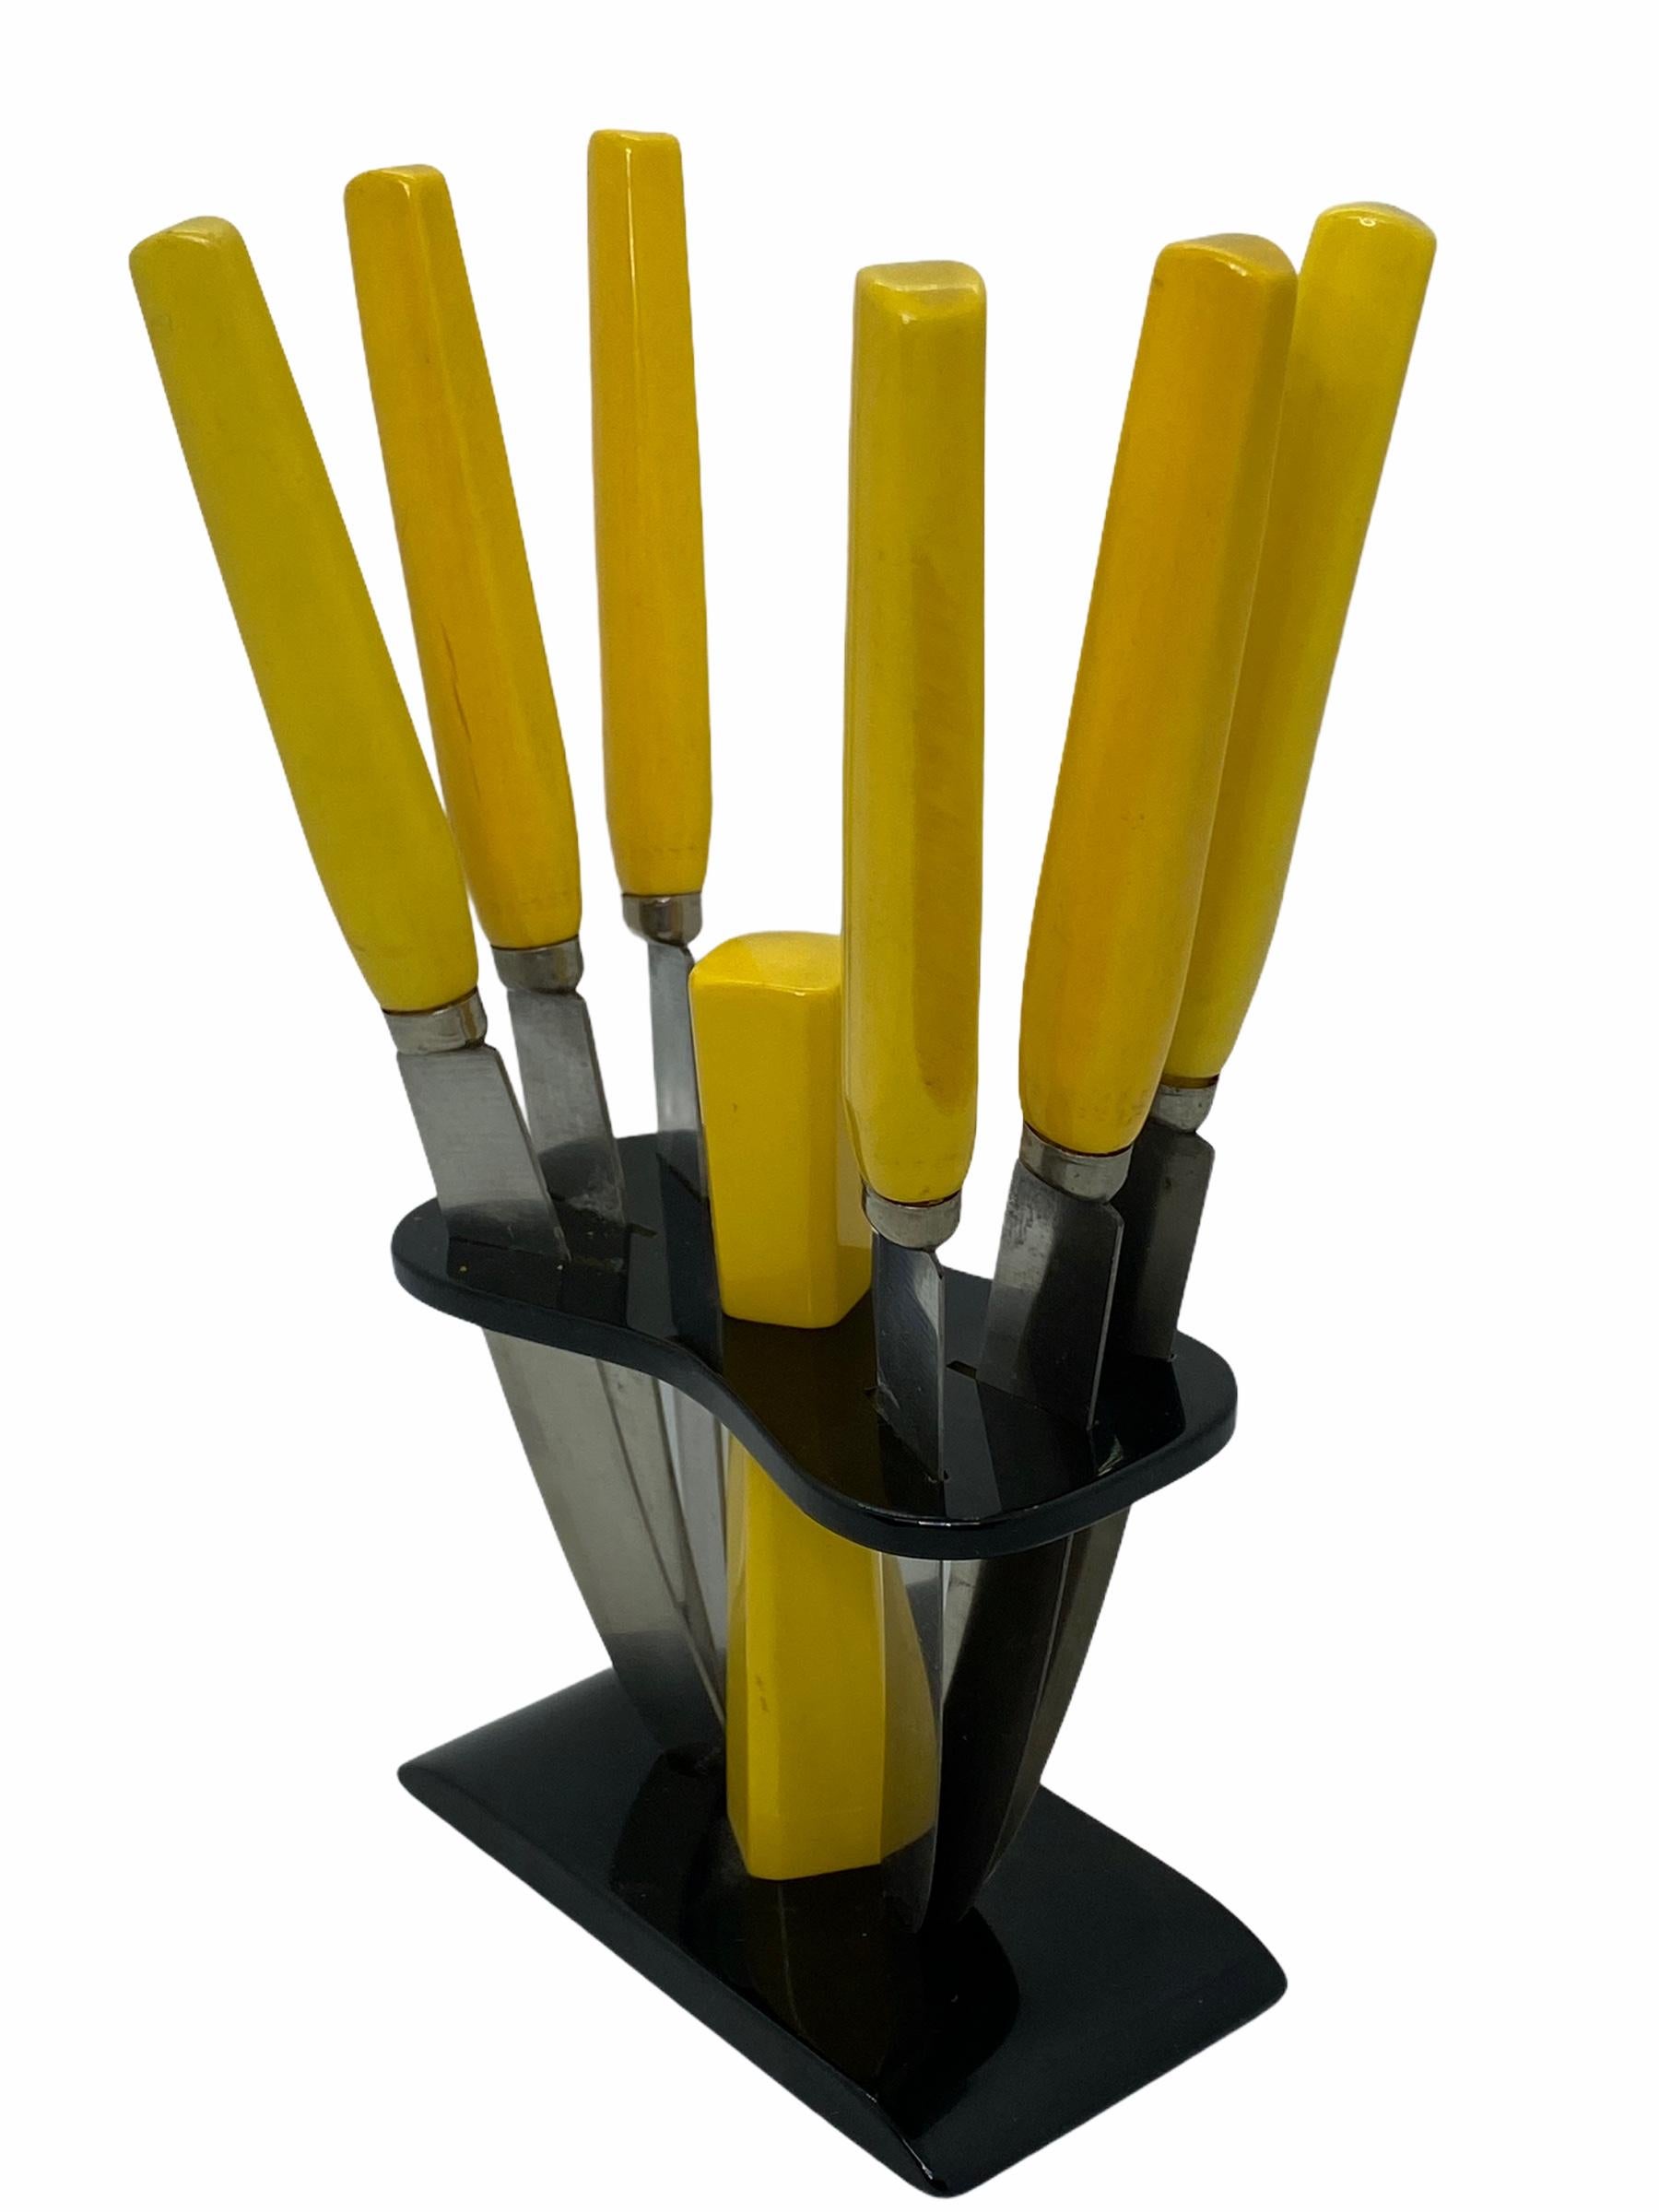 Art Deco Bakelite fruit knife set from the 1930's. Made in Germany. Yellow colored bakelite handled knives are set into a bakelite stand designed to display beautifully. Excellent condition. 1930's.
 